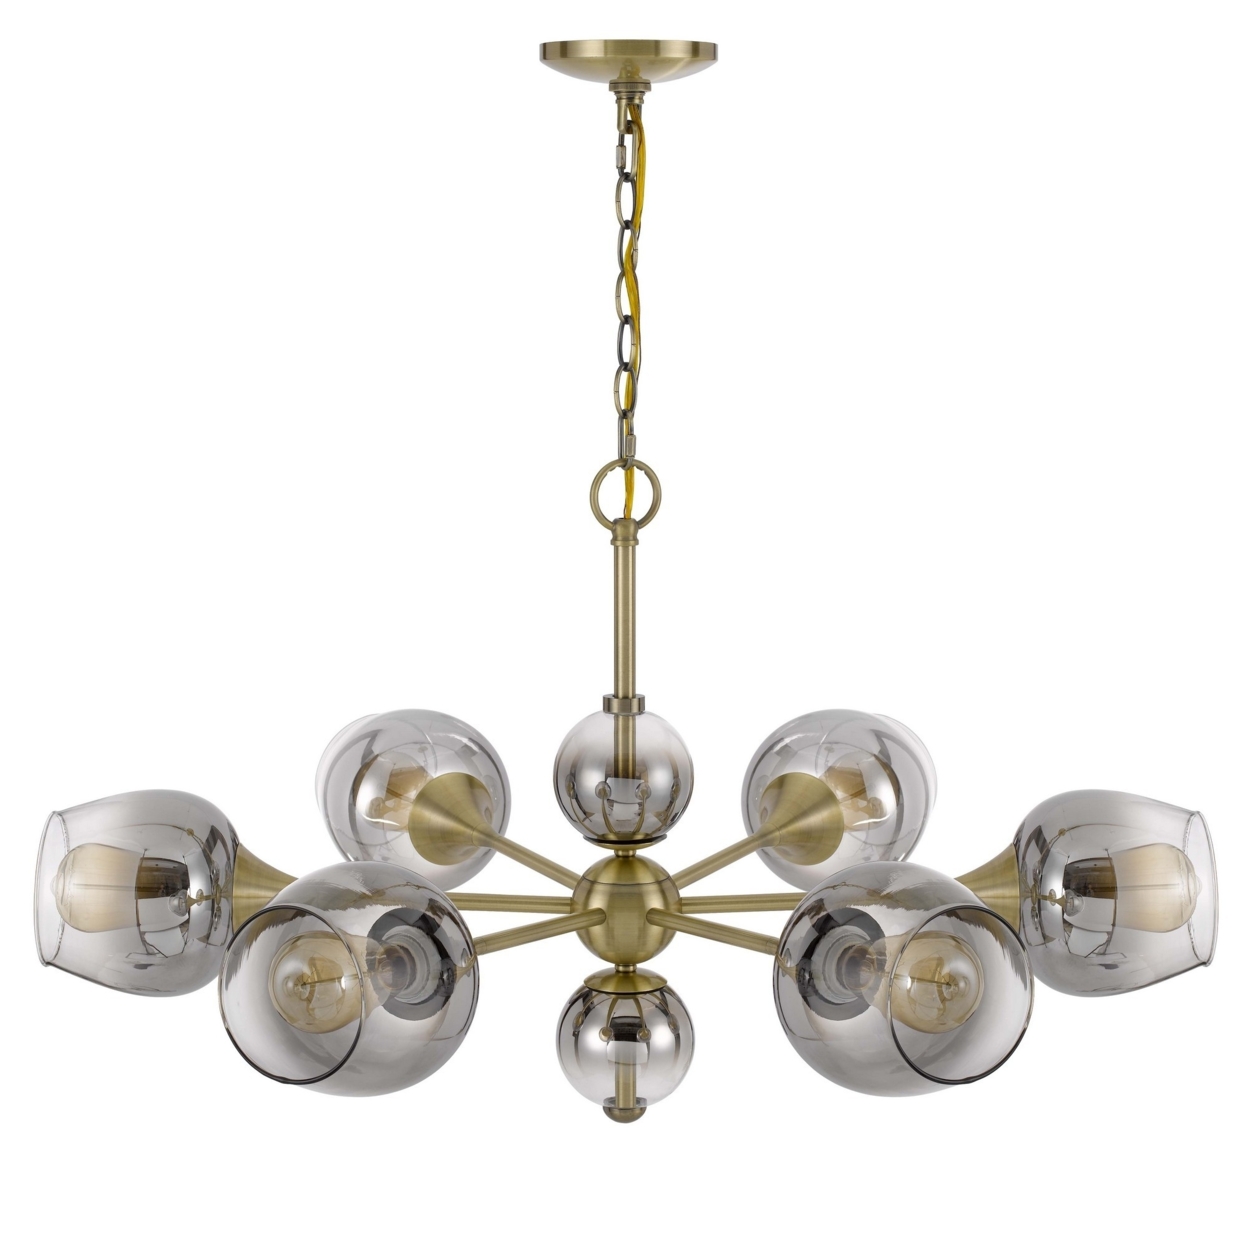 Chandelier With 6 Glass Shades And Metal Fixture Body, Gold- Saltoro Sherpi